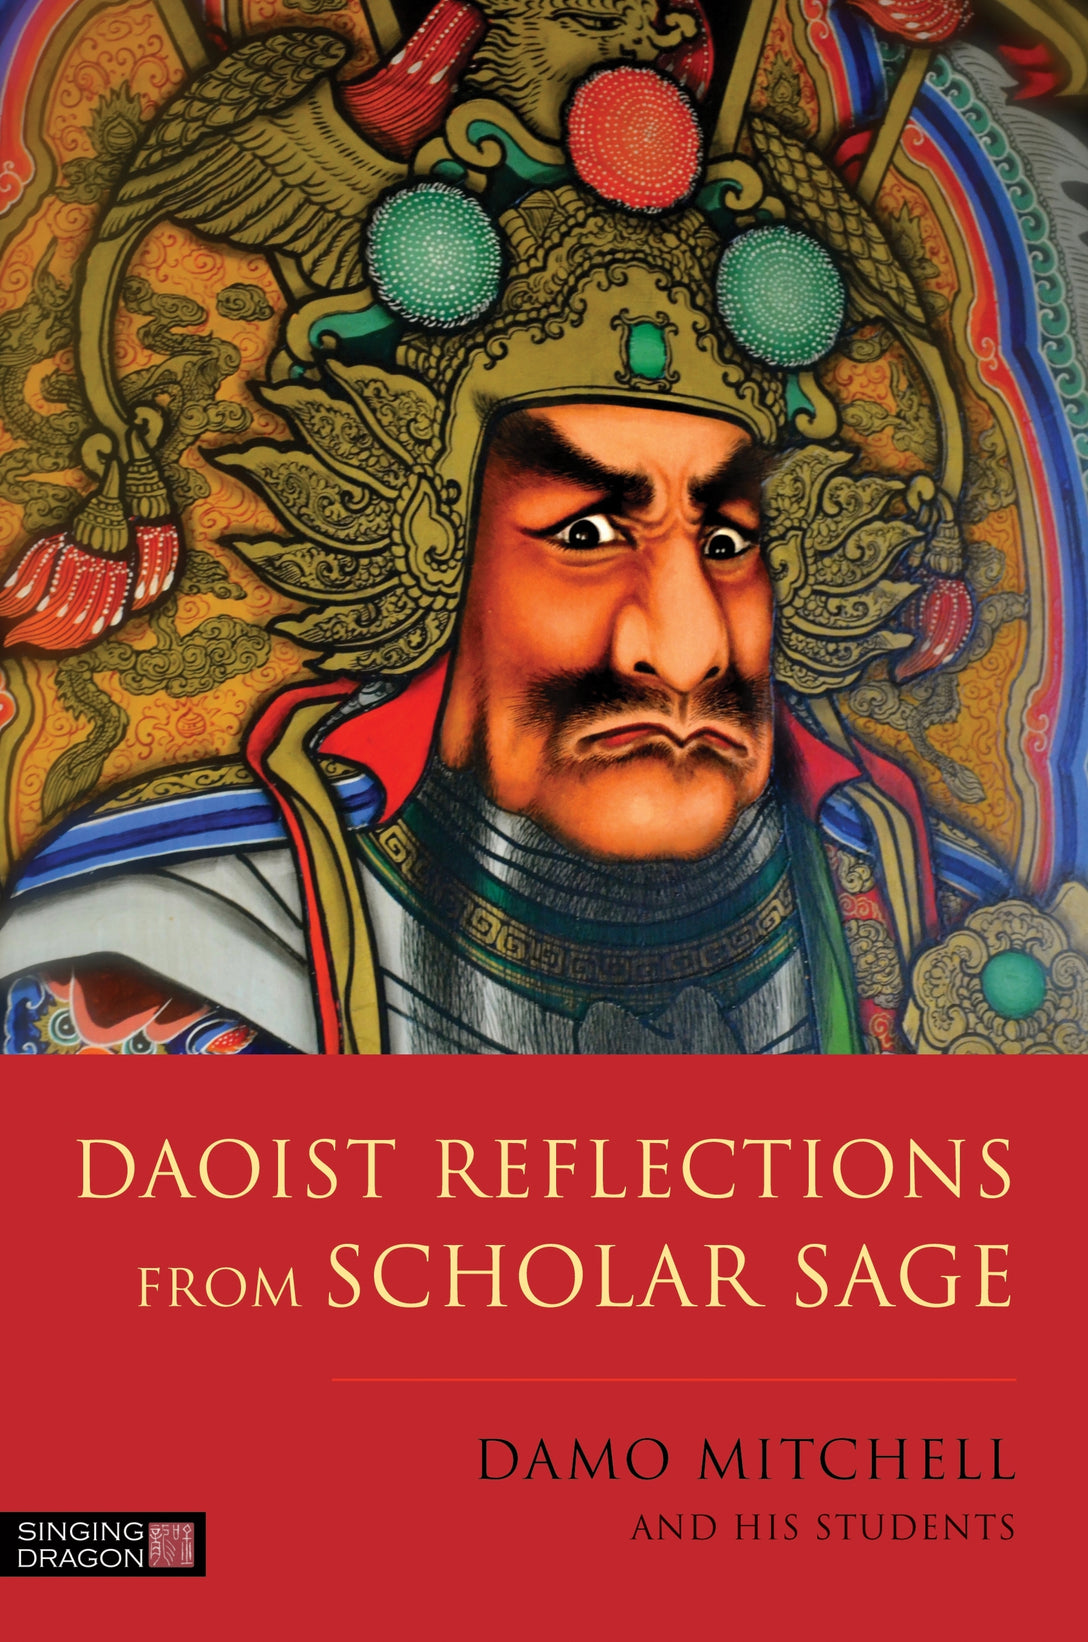 Daoist Reflections from Scholar Sage by Damo Mitchell